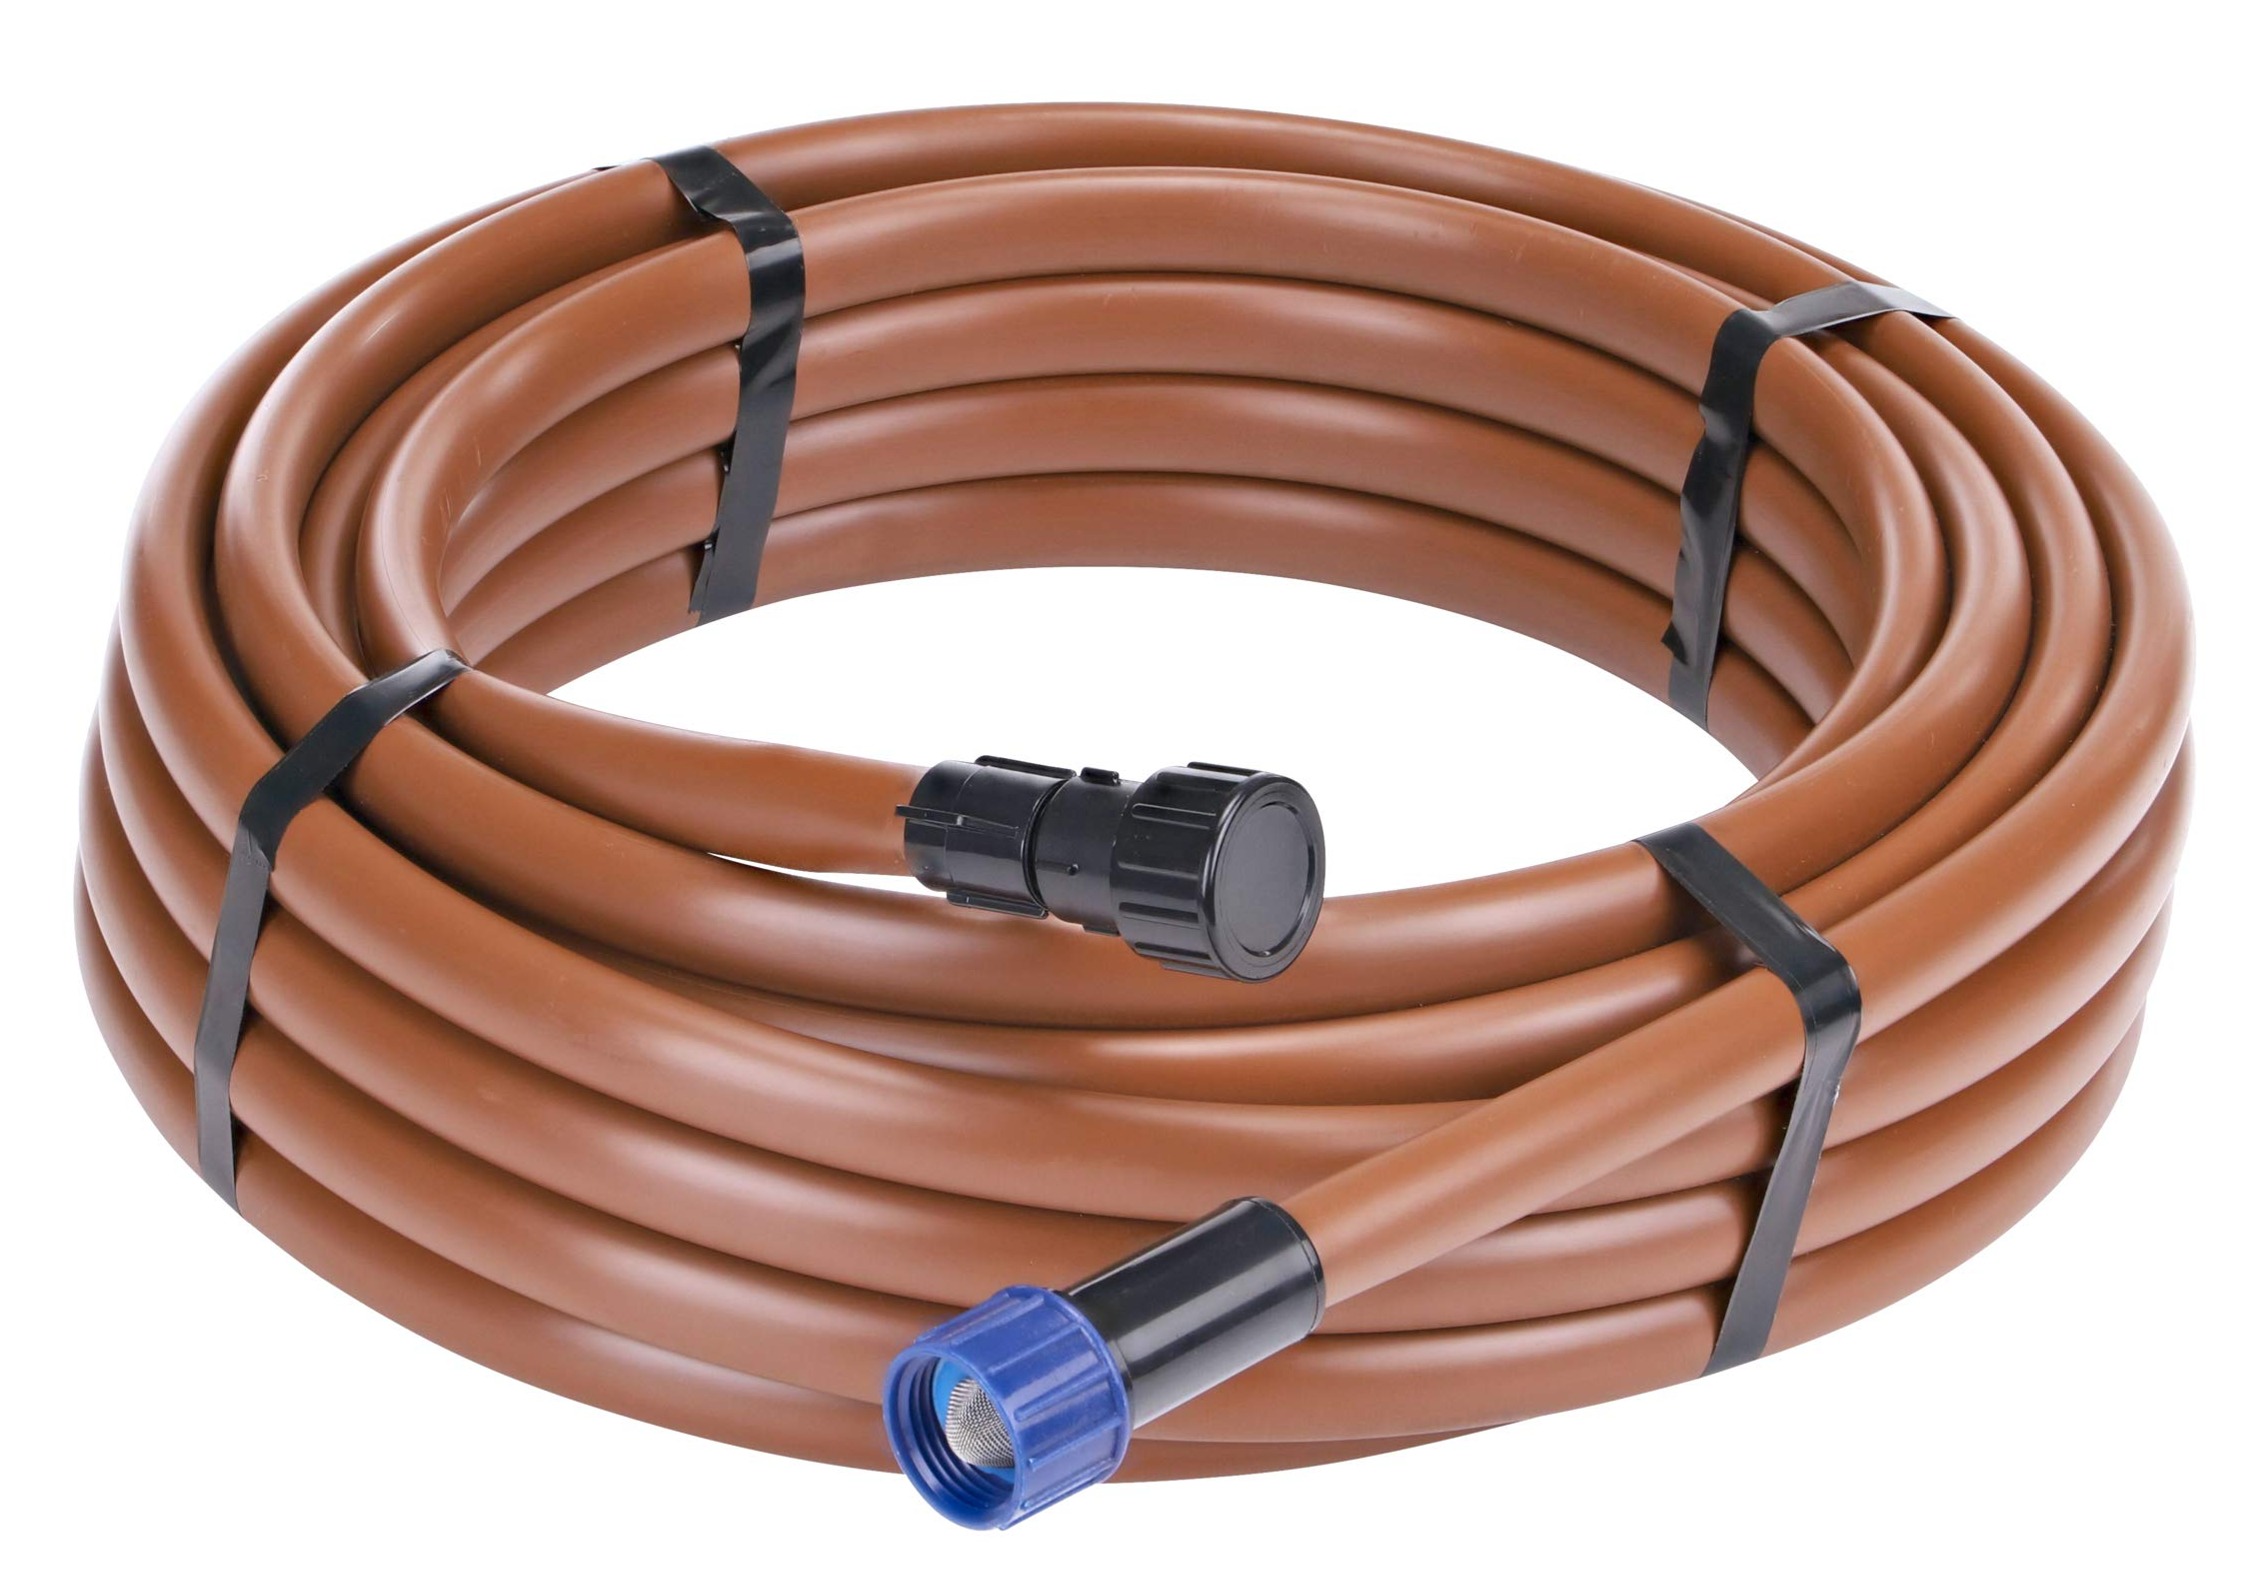 50' Raindrip 5/8" Drip Irrigation Supply Tubing w/ Hose Thread Swivel Adapter and End Plug $11.98 + Free Shipping w/ Prime or on $35+